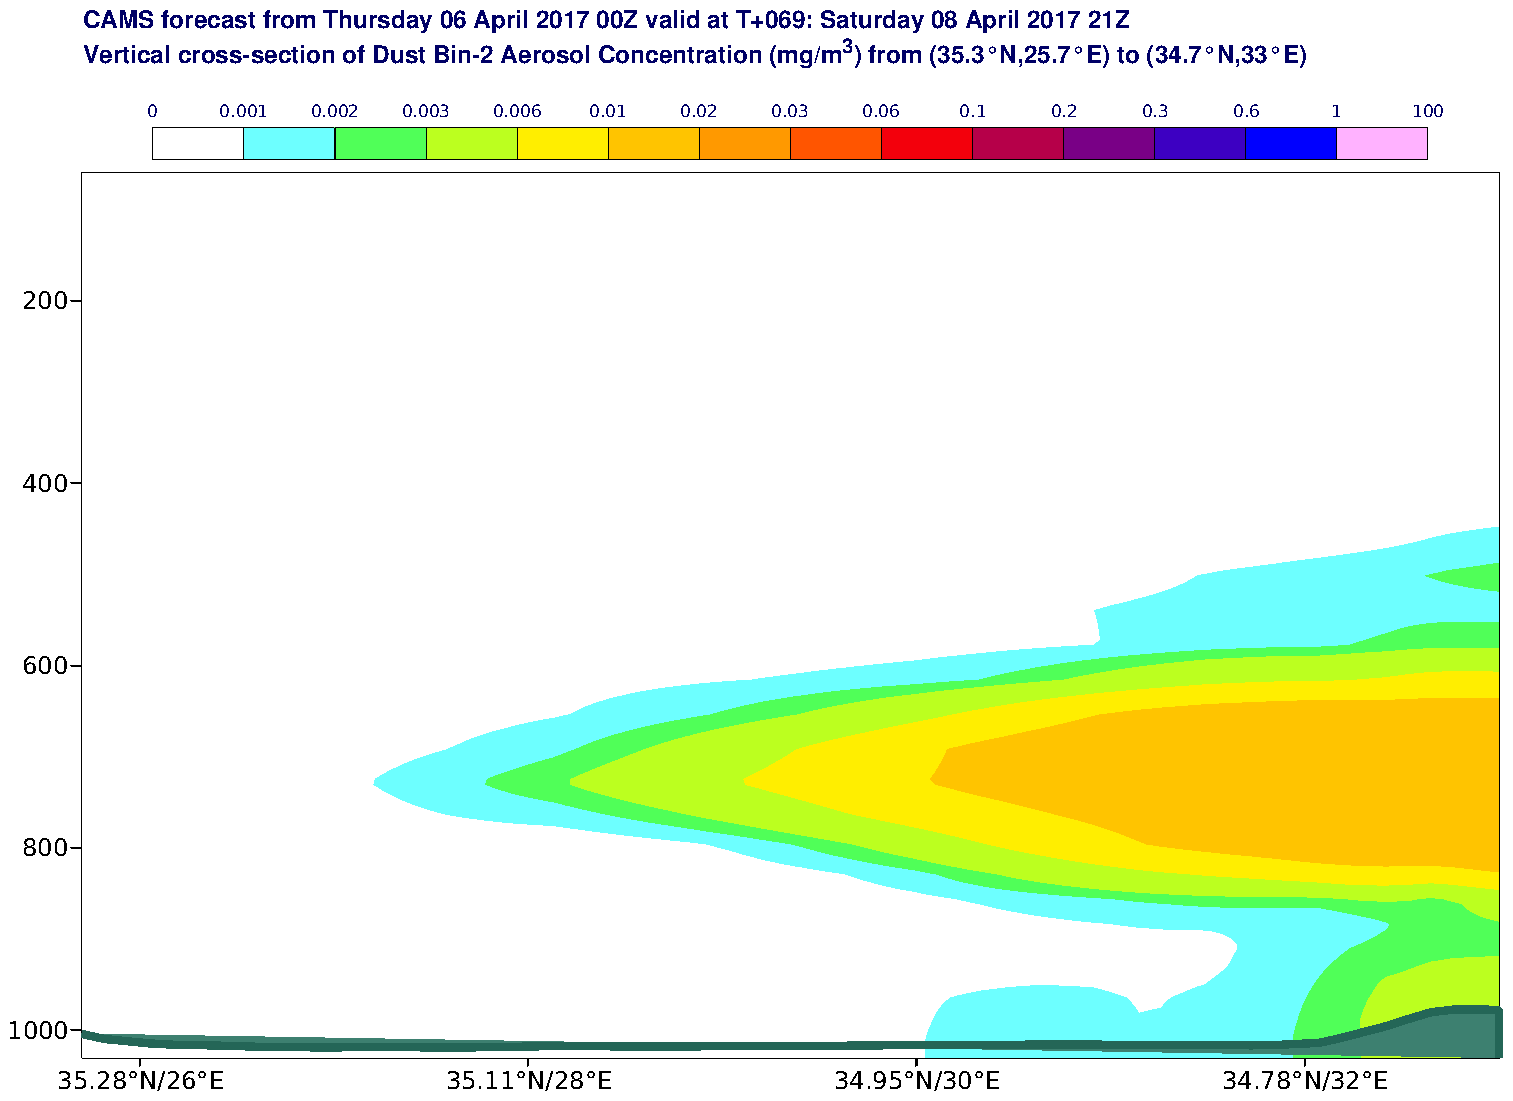 Vertical cross-section of Dust Bin-2 Aerosol Concentration (mg/m3) valid at T69 - 2017-04-08 21:00